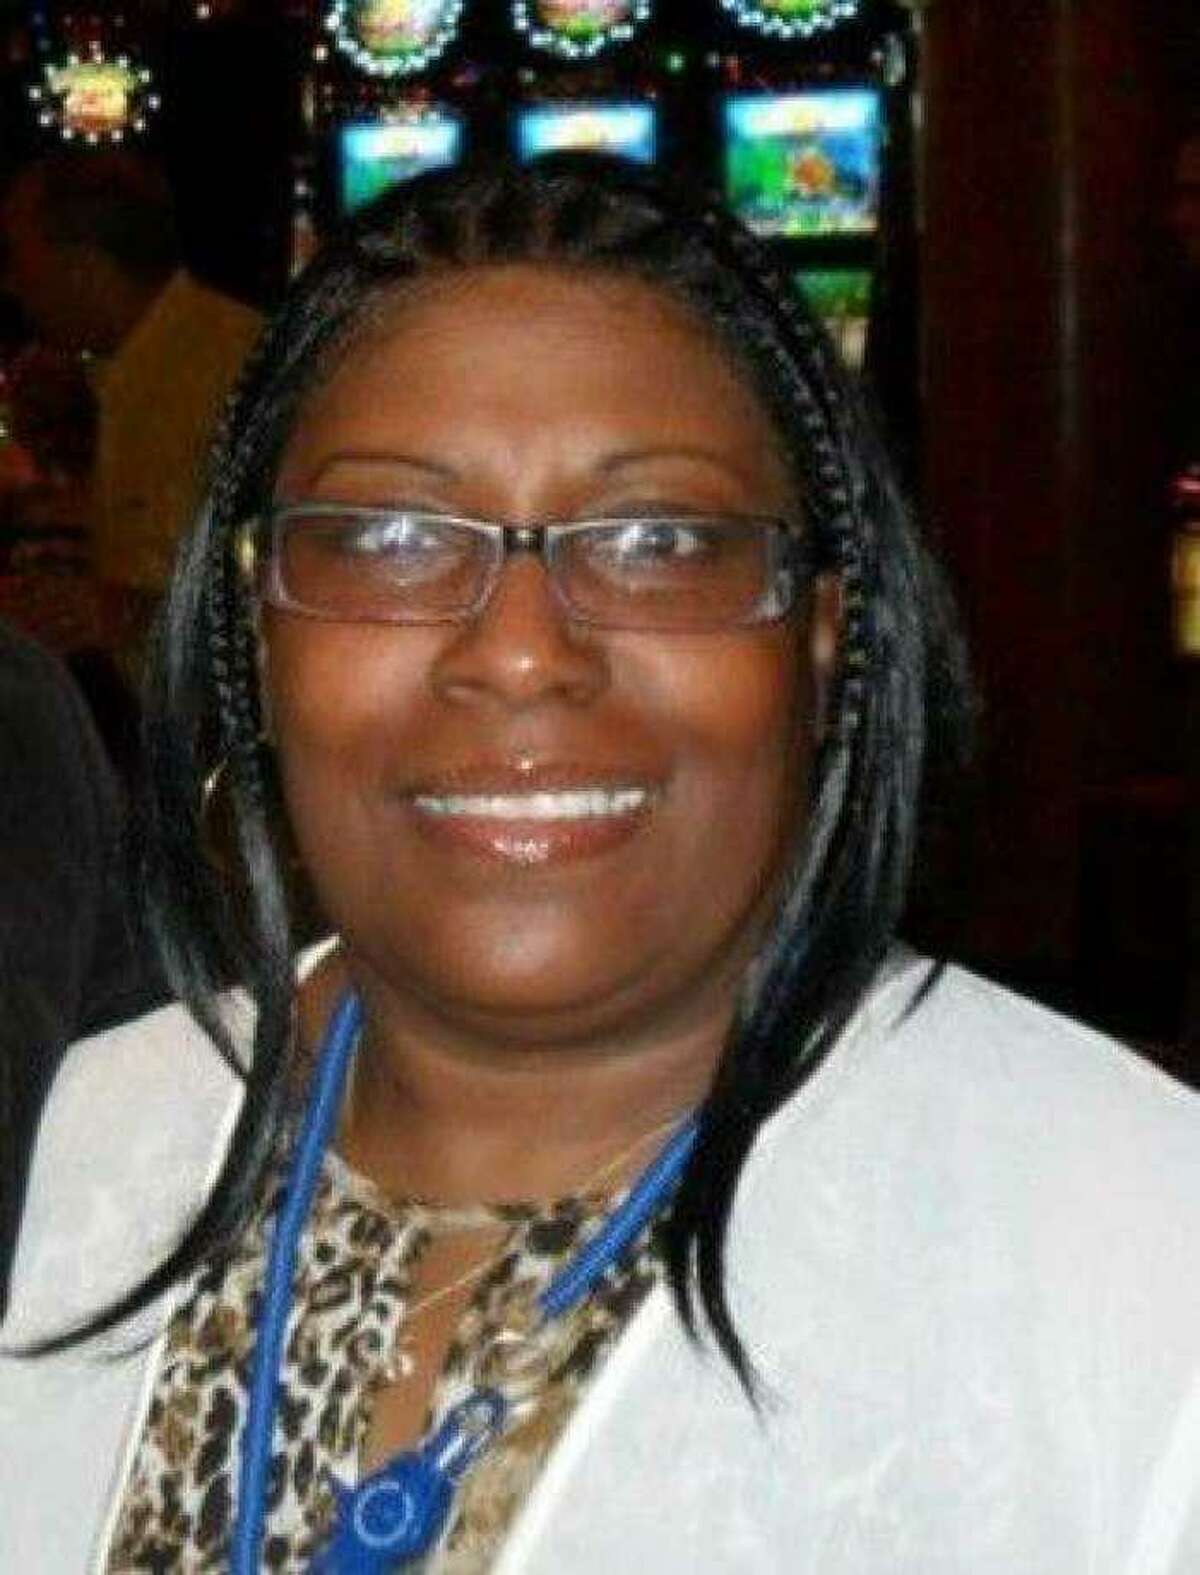 Eddie Marie Youngblood was murdered in May 2013 while delivering mail on her rural route in Coldspring. James Wayne Ham pleaded guilty to the killing in December 2021 and was sentenced to life in prison. He was one of 12 federal defendants for whom Attorney General Merrick Garland withdrew the Justice Department’s intent to seek the death penalty.